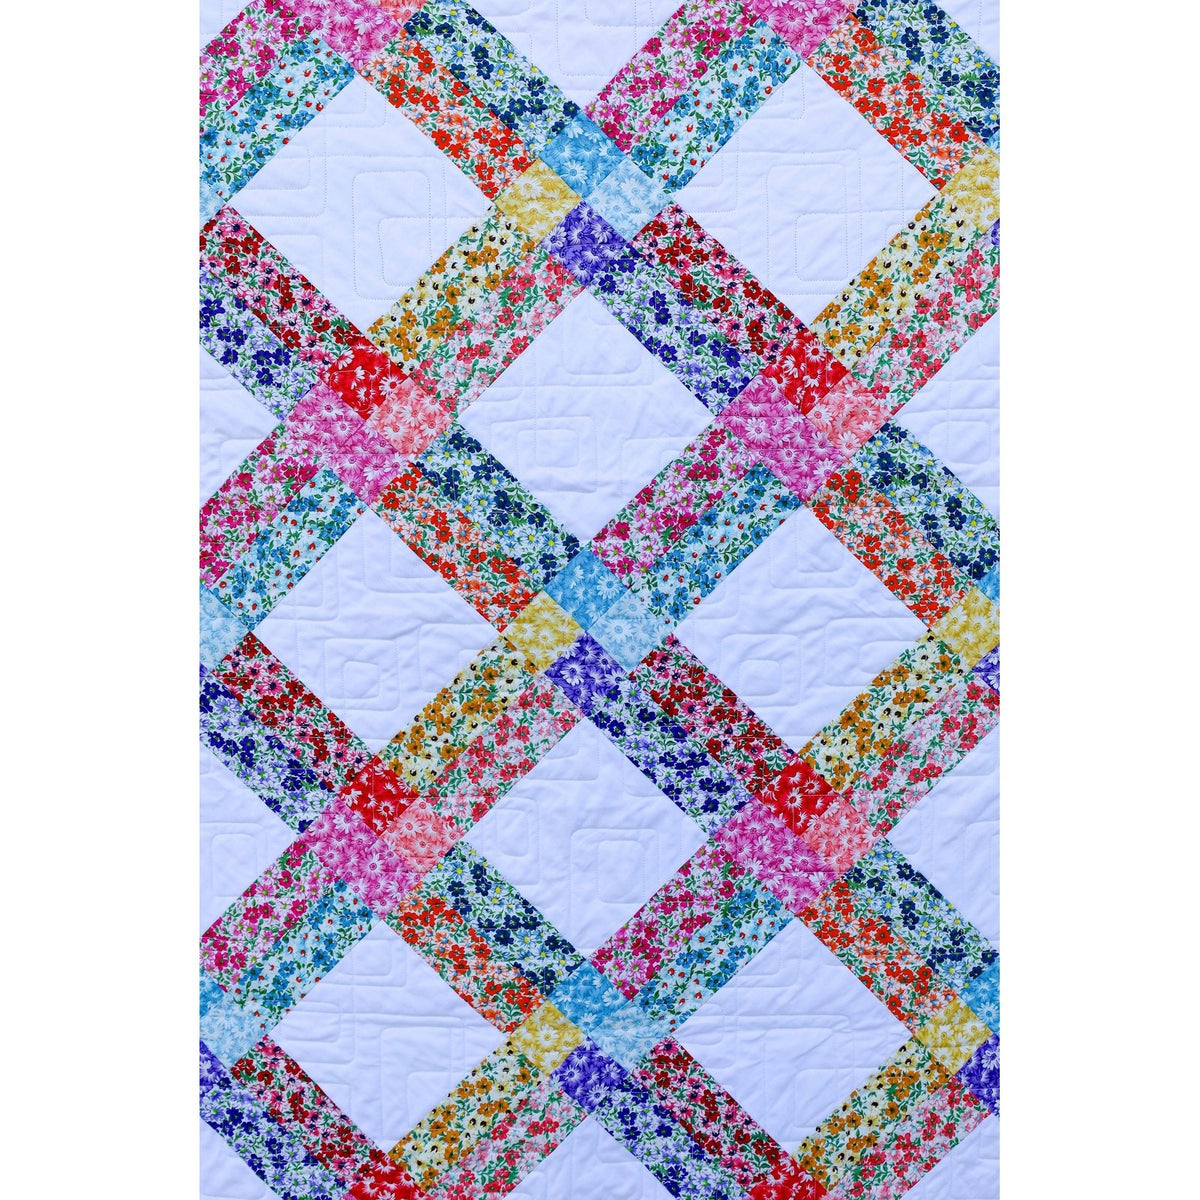 Morning Glory Quilt Kit Fabric Pattern, Binding, And backing Included ALL PRE CUT 63 X 77 Easy Triangle Quilt Ready to Sew Beginner - Limited Edition 1,000